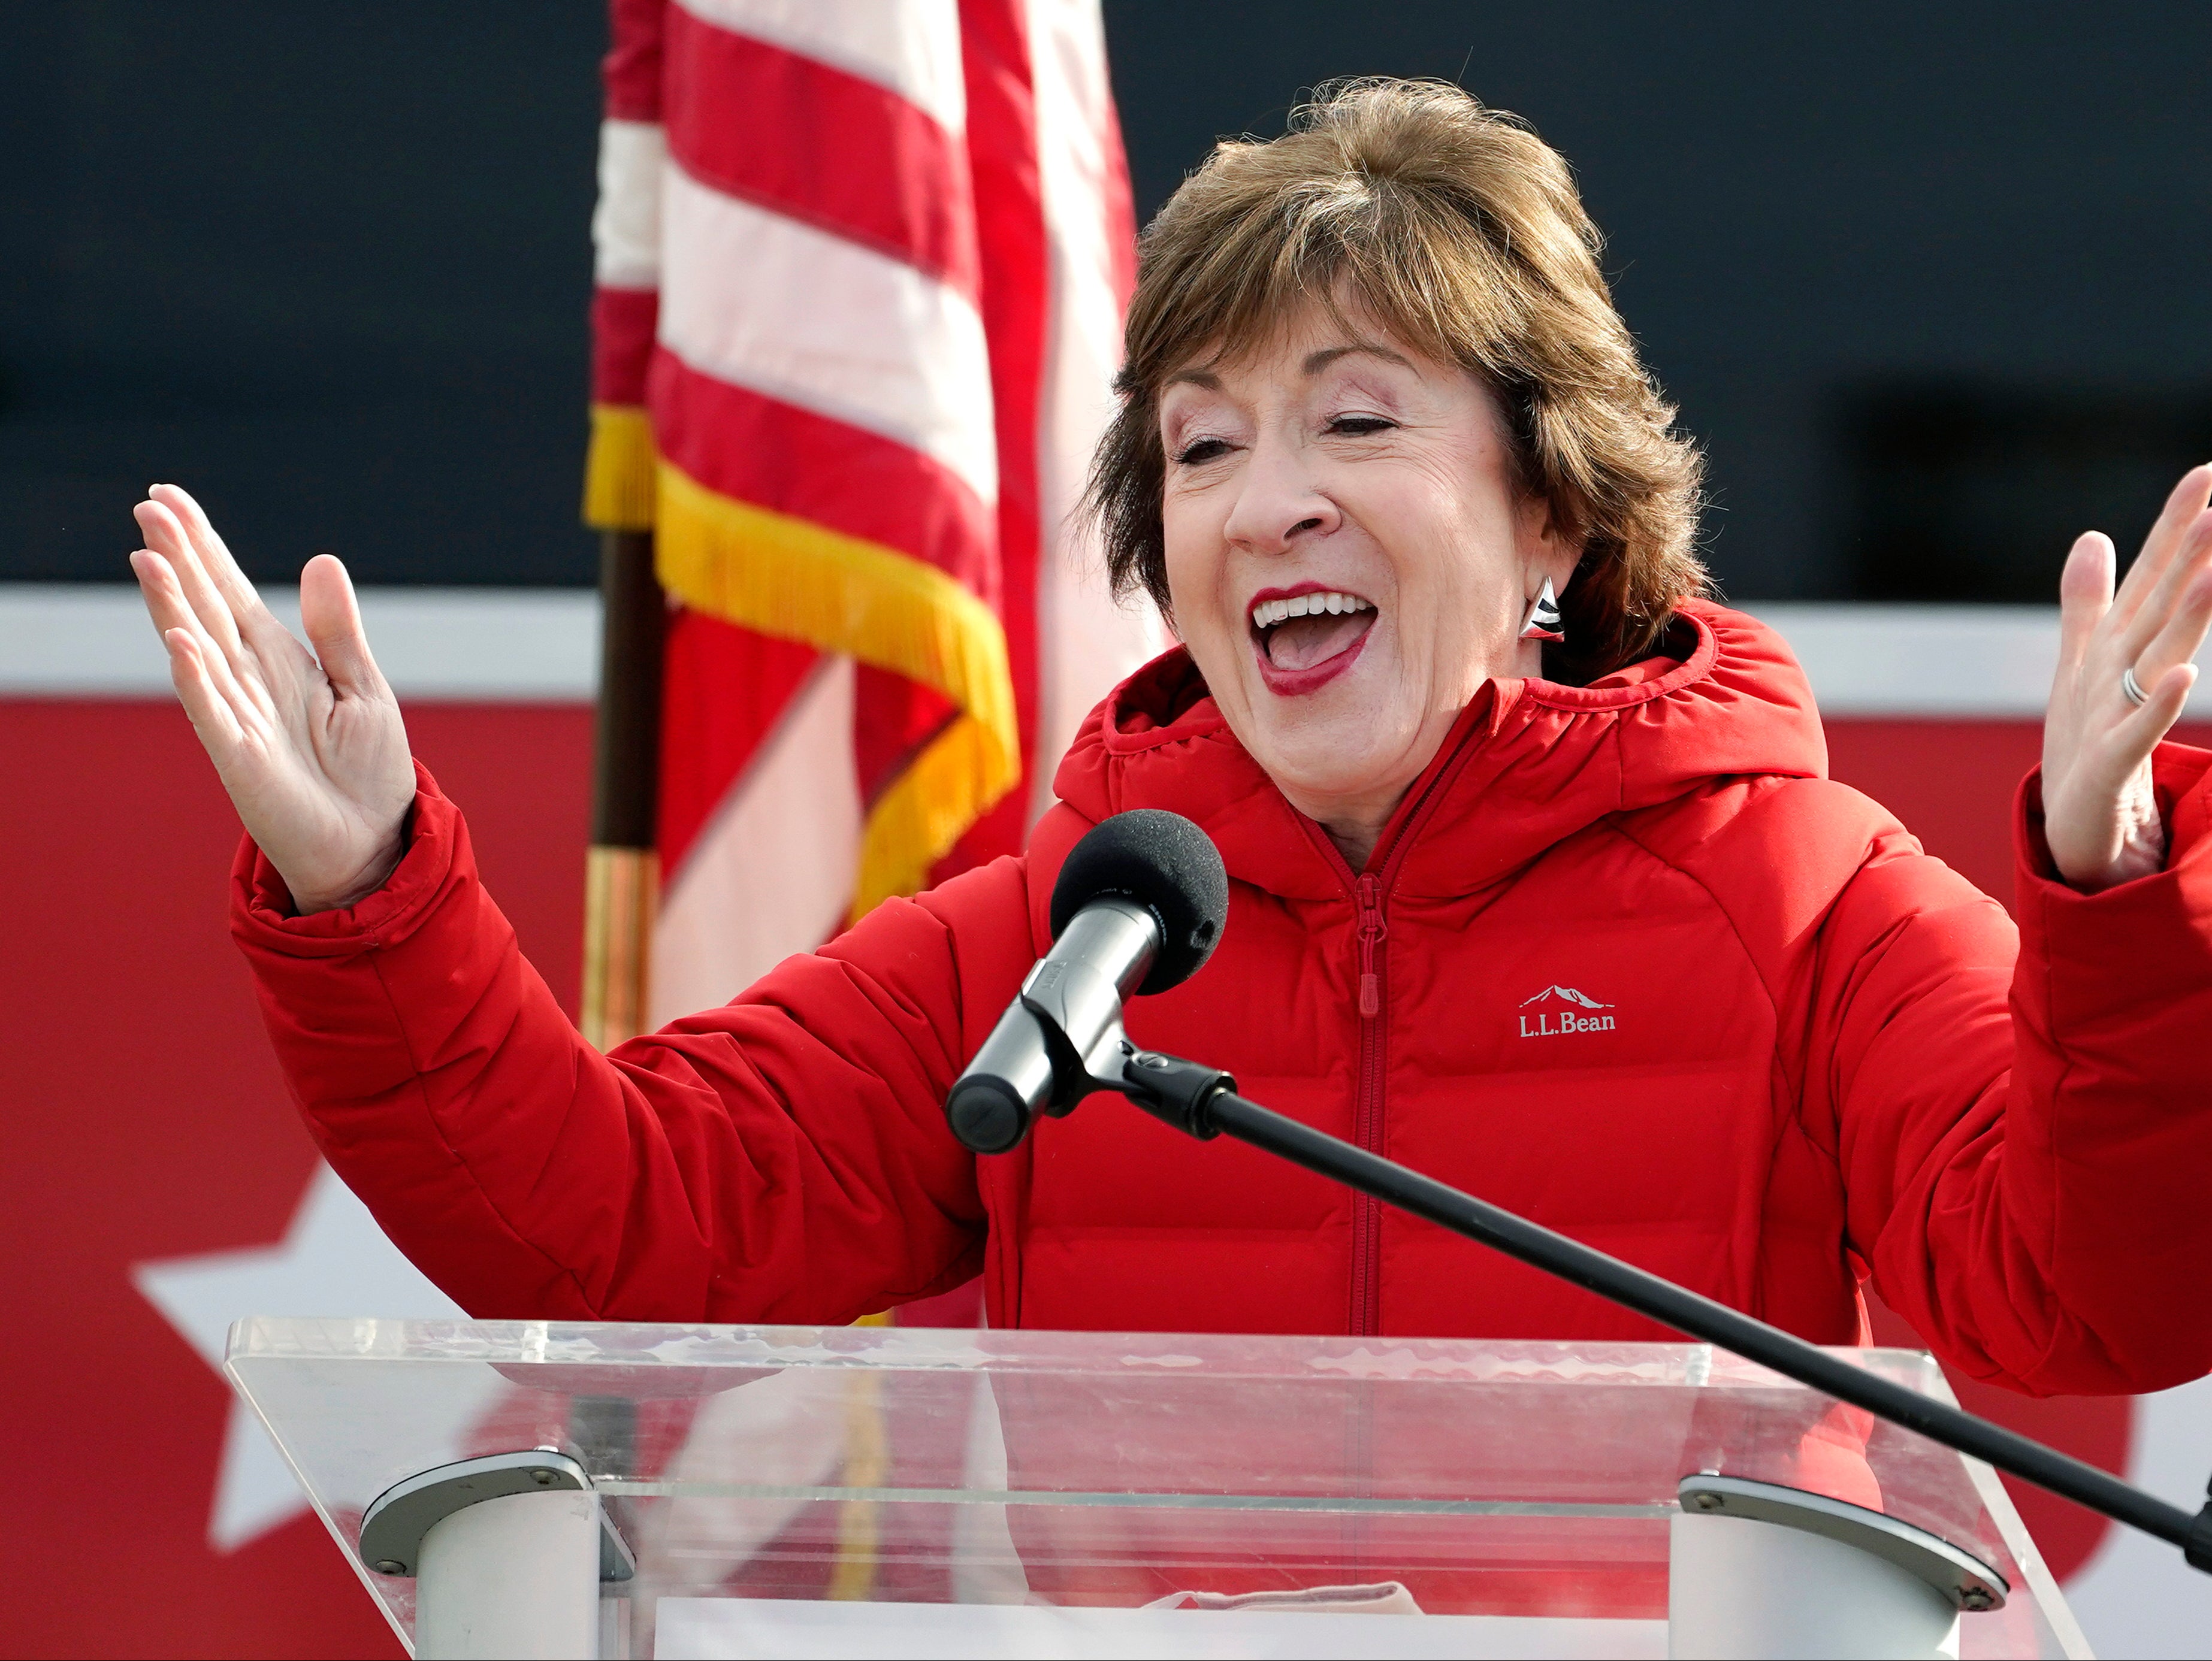 Republican senator Susan Collins, R-Maine, speaks on Wednesday 4 November 2020, in Bangor, Maine, after Tuesday’s election